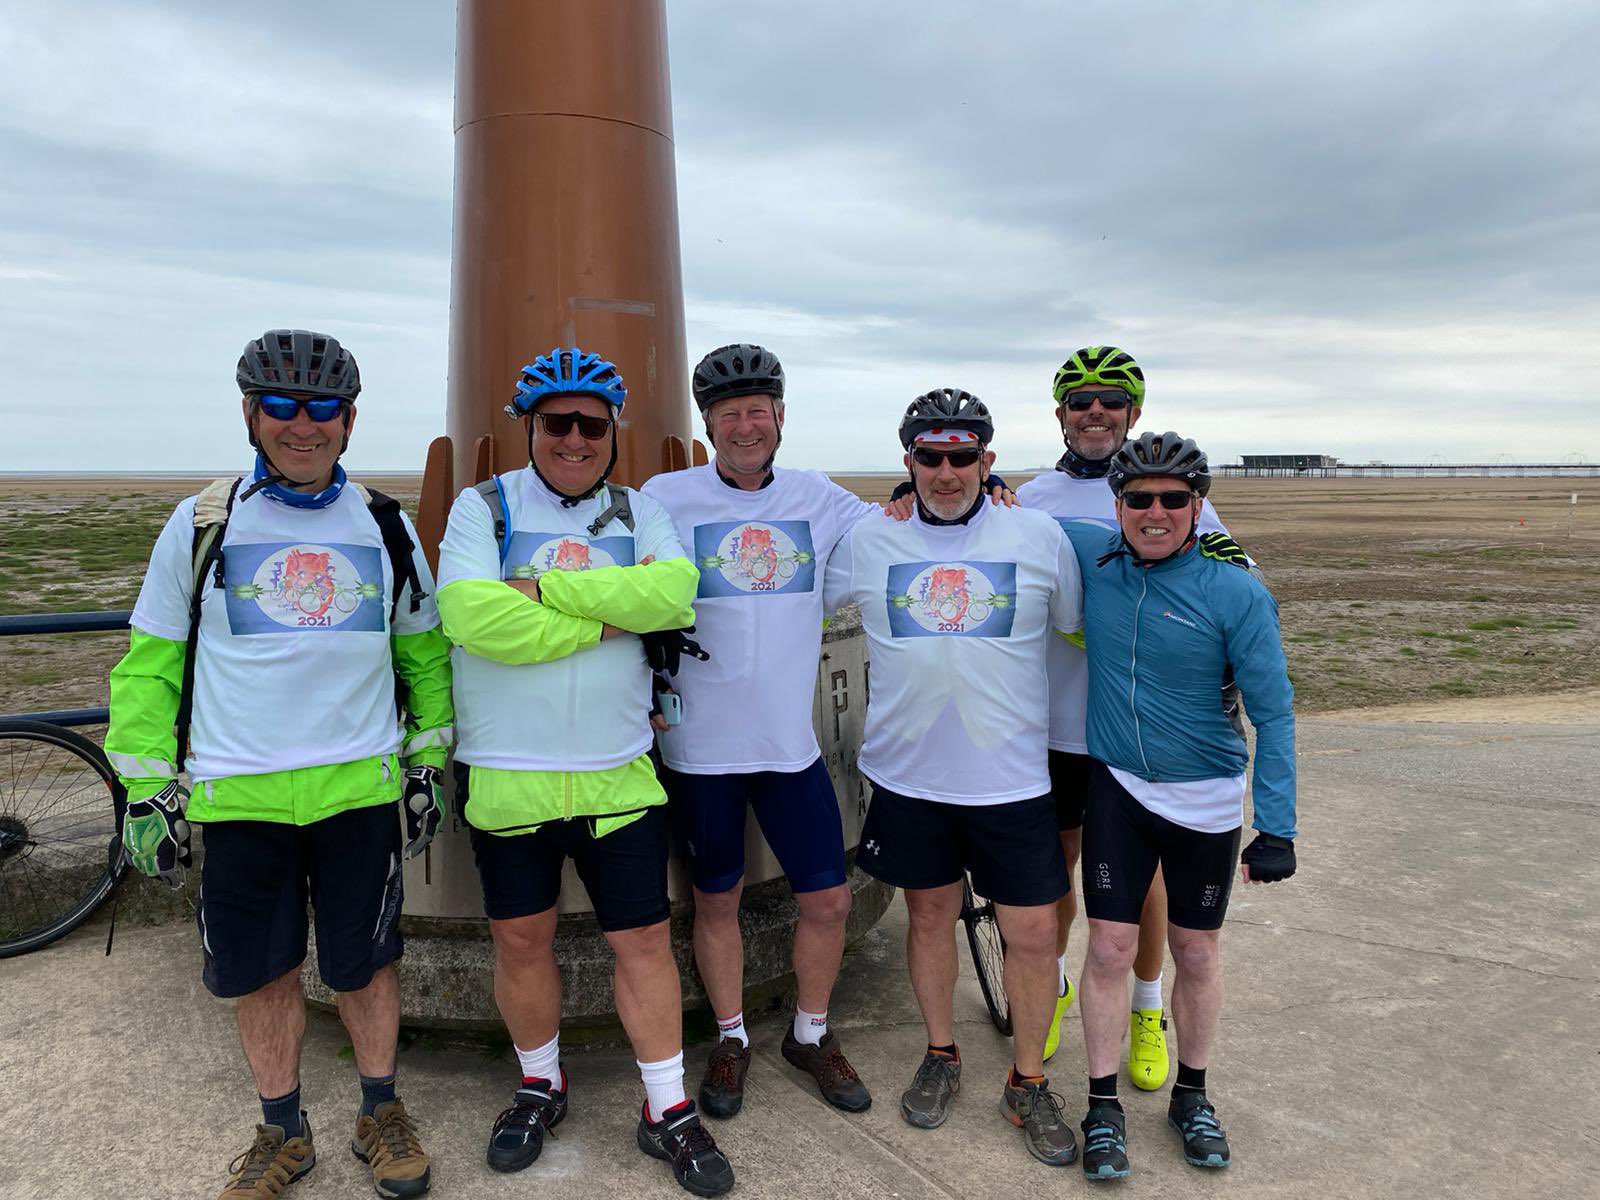 David Ayre and friends are cycling from Southport to Hornsea top raise money for the New Start heart charity in the David Ayres Coast2Coast Cycle Ride